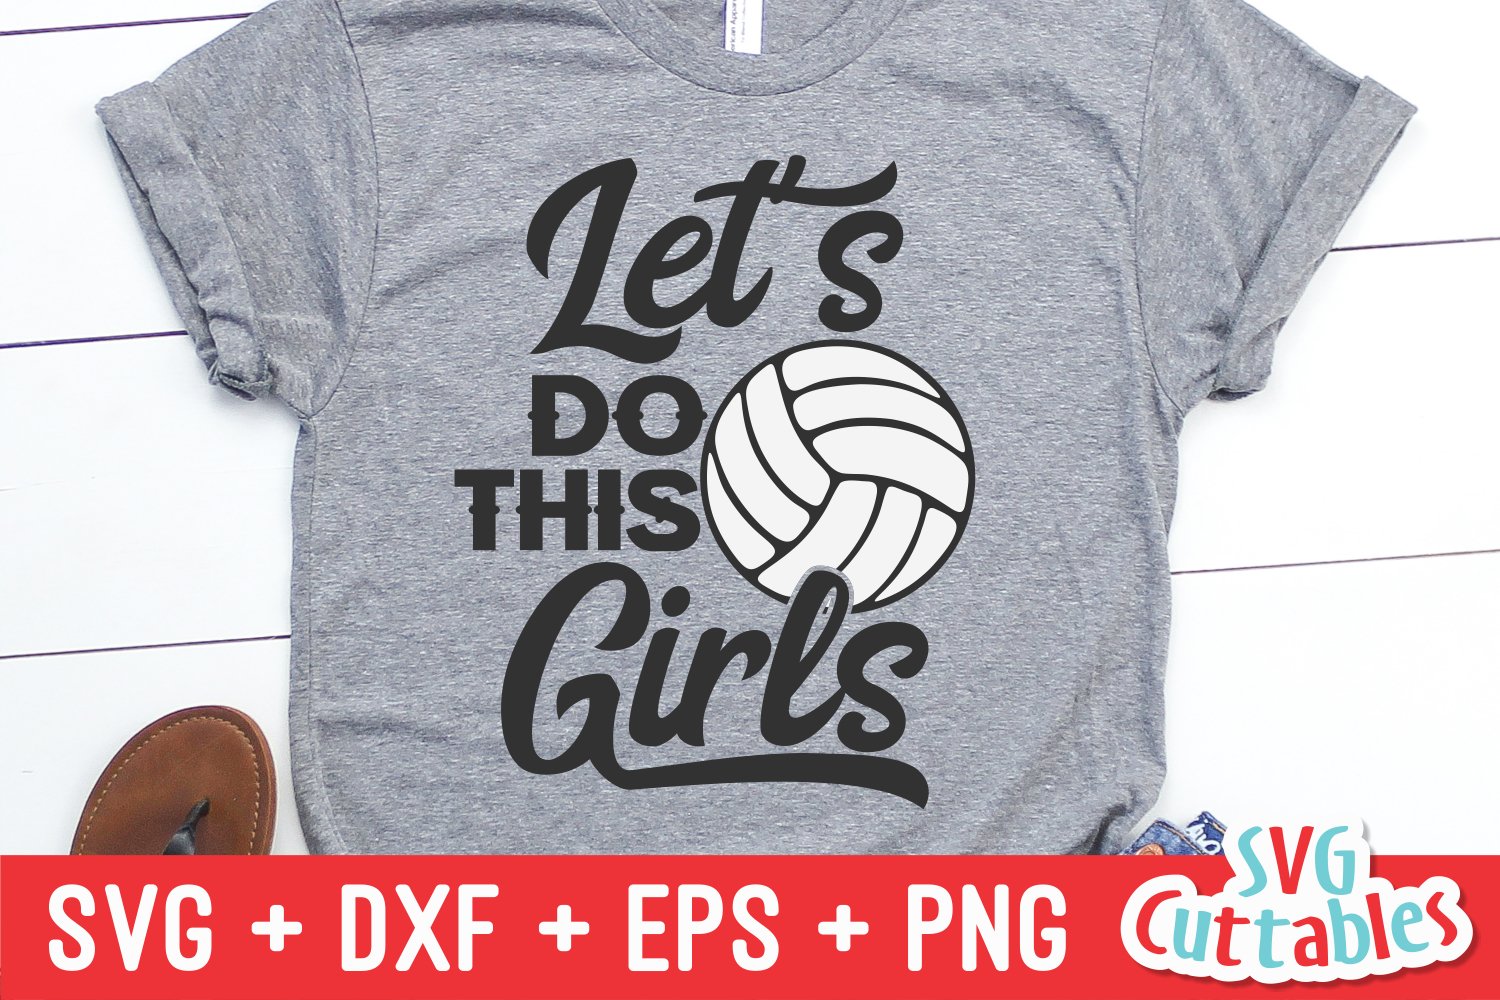 Let's do this girls on t-shirt design.